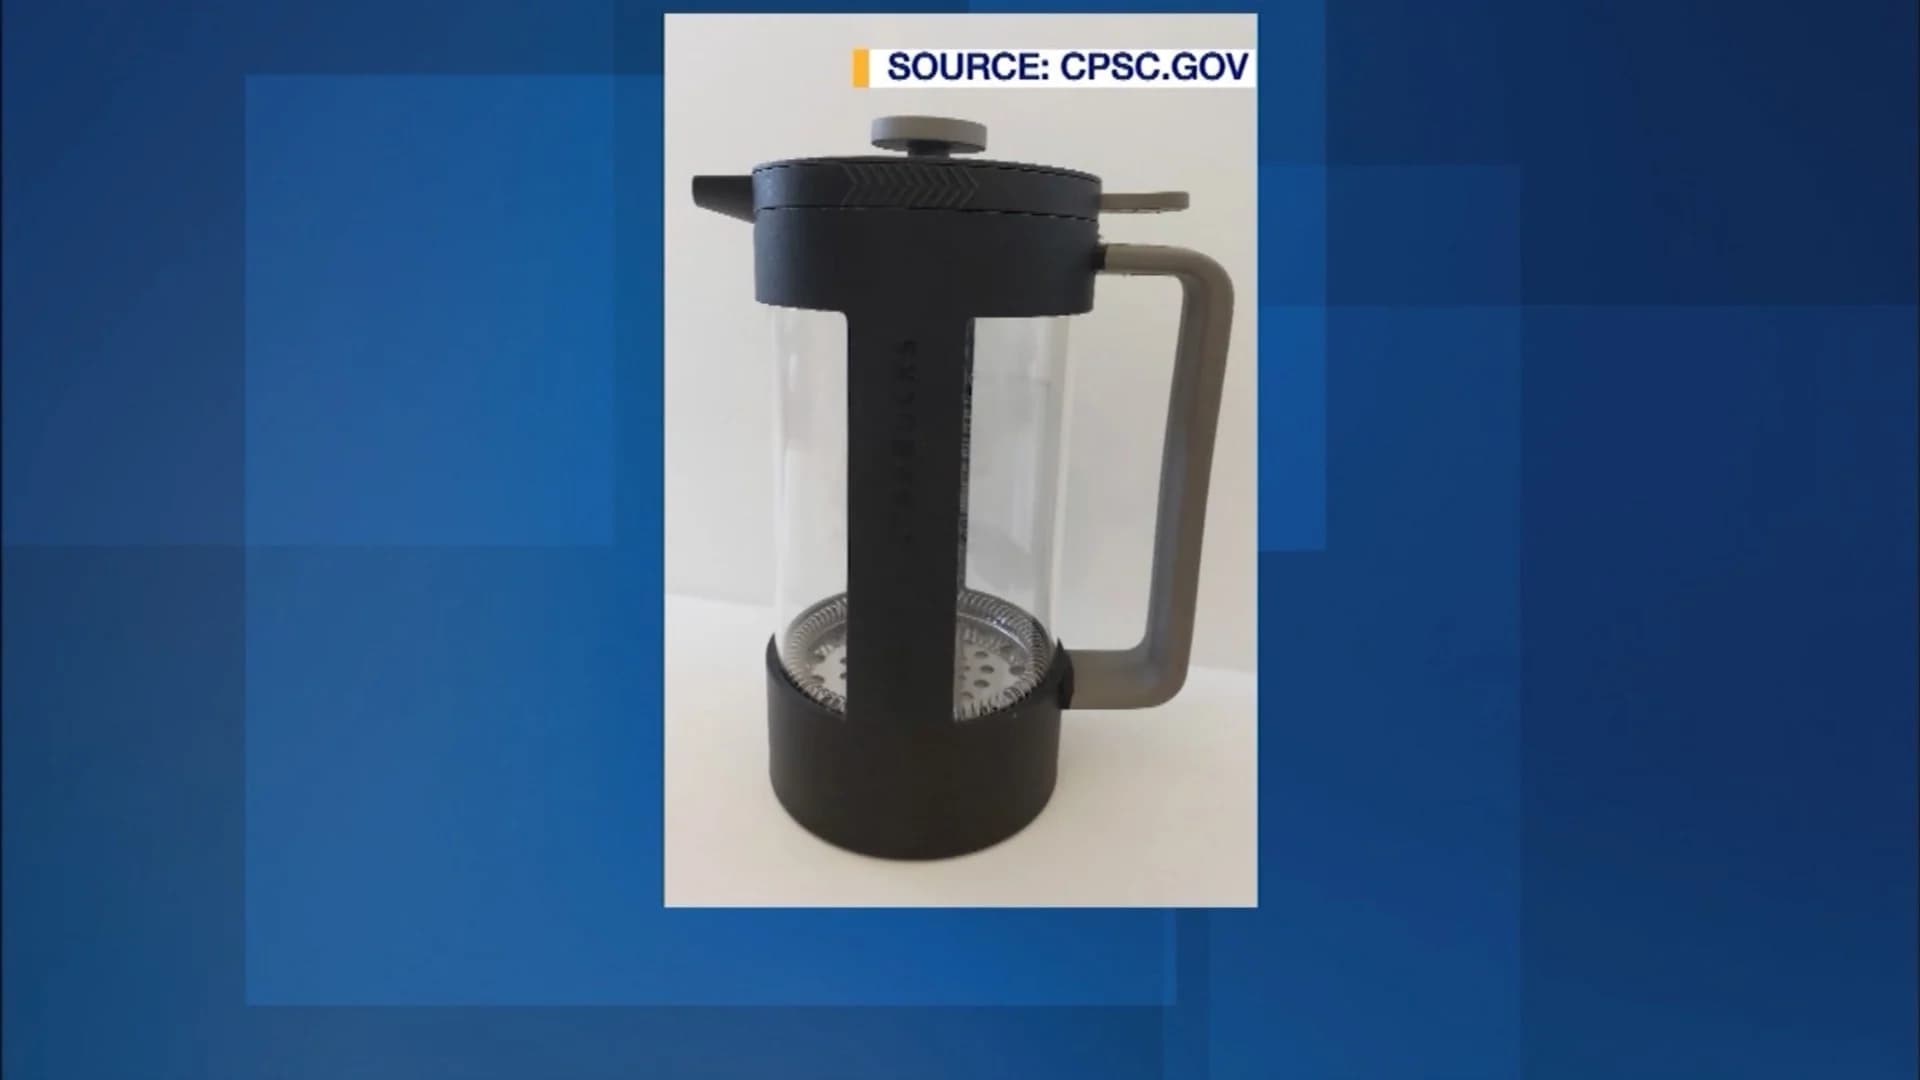 Starbucks recalls 230K French presses after multiple reports of injuries